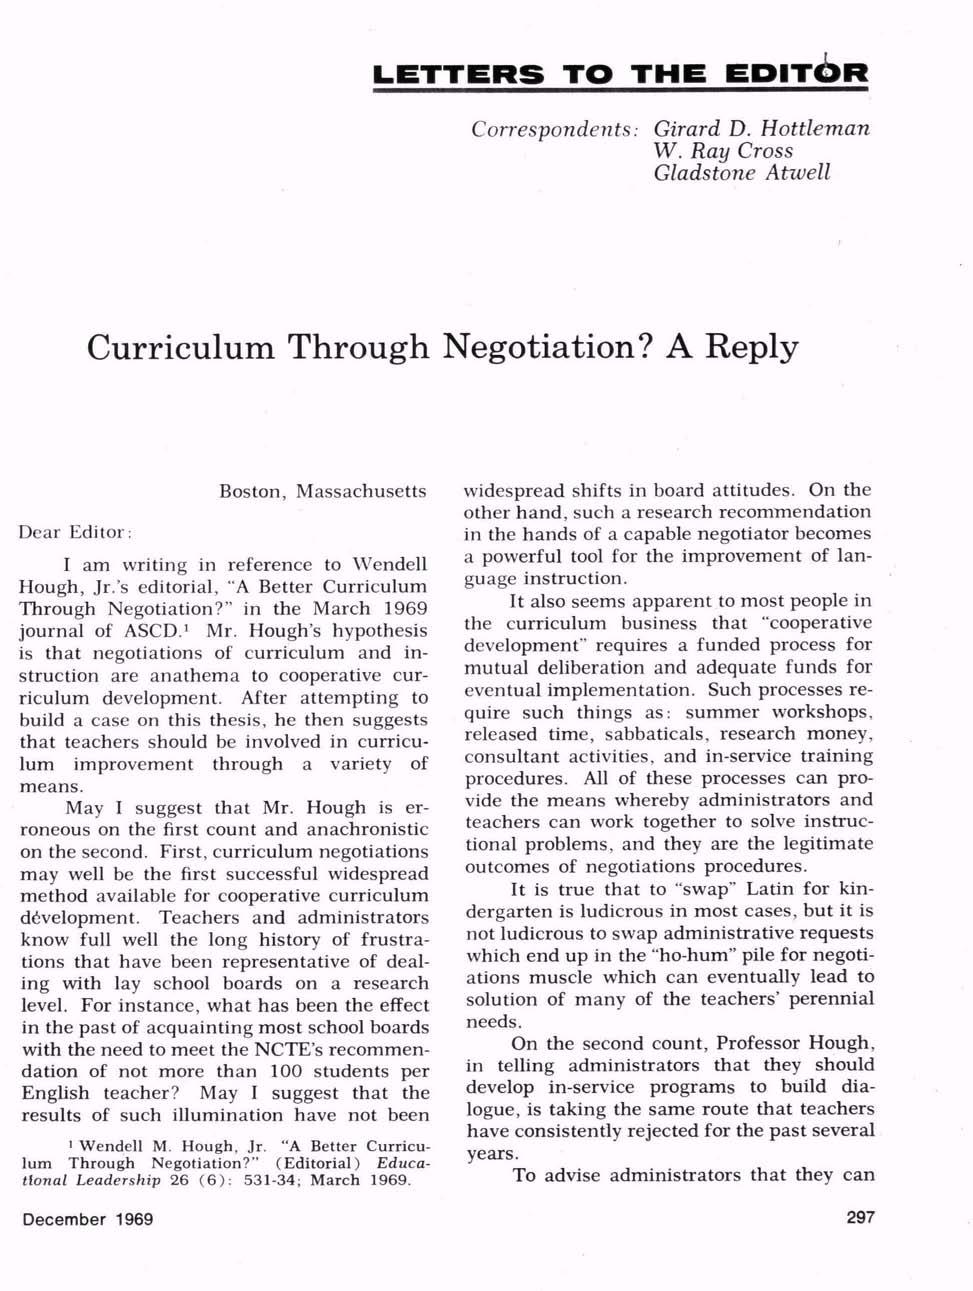 Curriculum Through Negotiation? A Reply Dear Editor: Boston, Massachusetts I am writing in reference to Wendell Hough, Jr.'s editorial, "A Better Curriculum Through Negotiation?